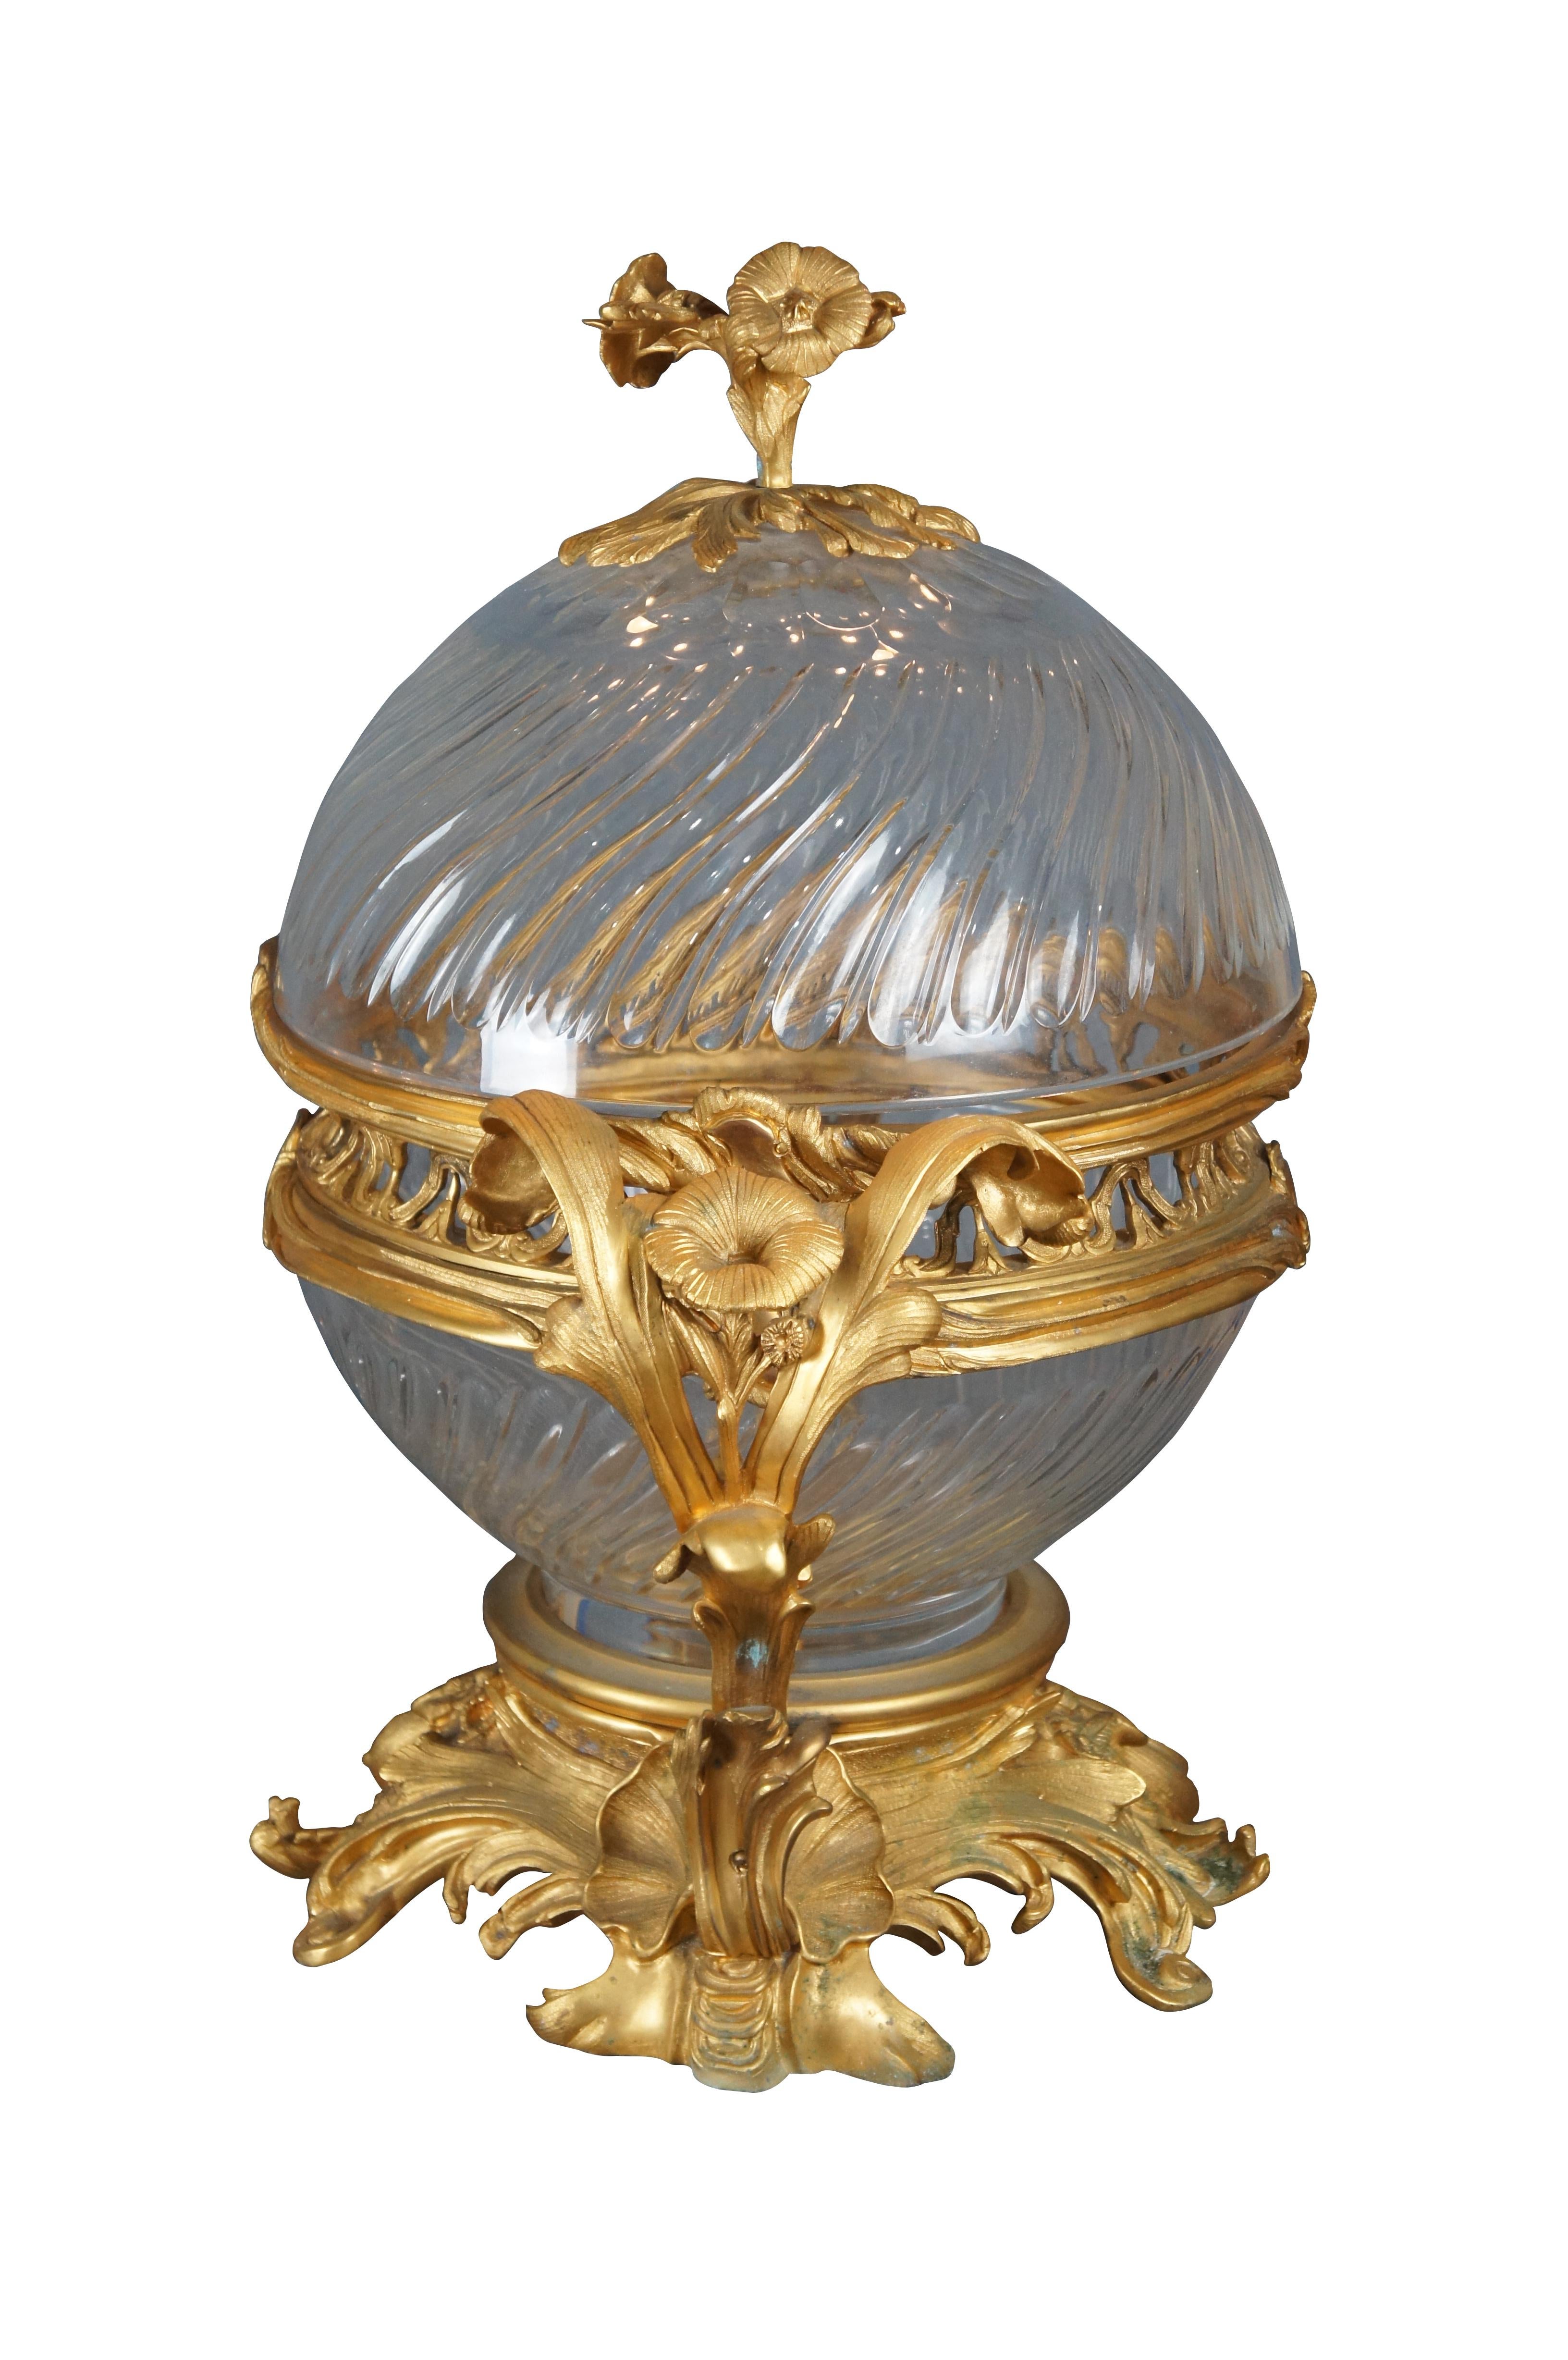 Large and impressive French Louis XV style ormolu-mounted crystal incense burner / centerpiece bowl and cover. Features beautifully chiseled brass mounts in 24 carats with tulip and acanthus folitate details. The bowl is pierced at the center and